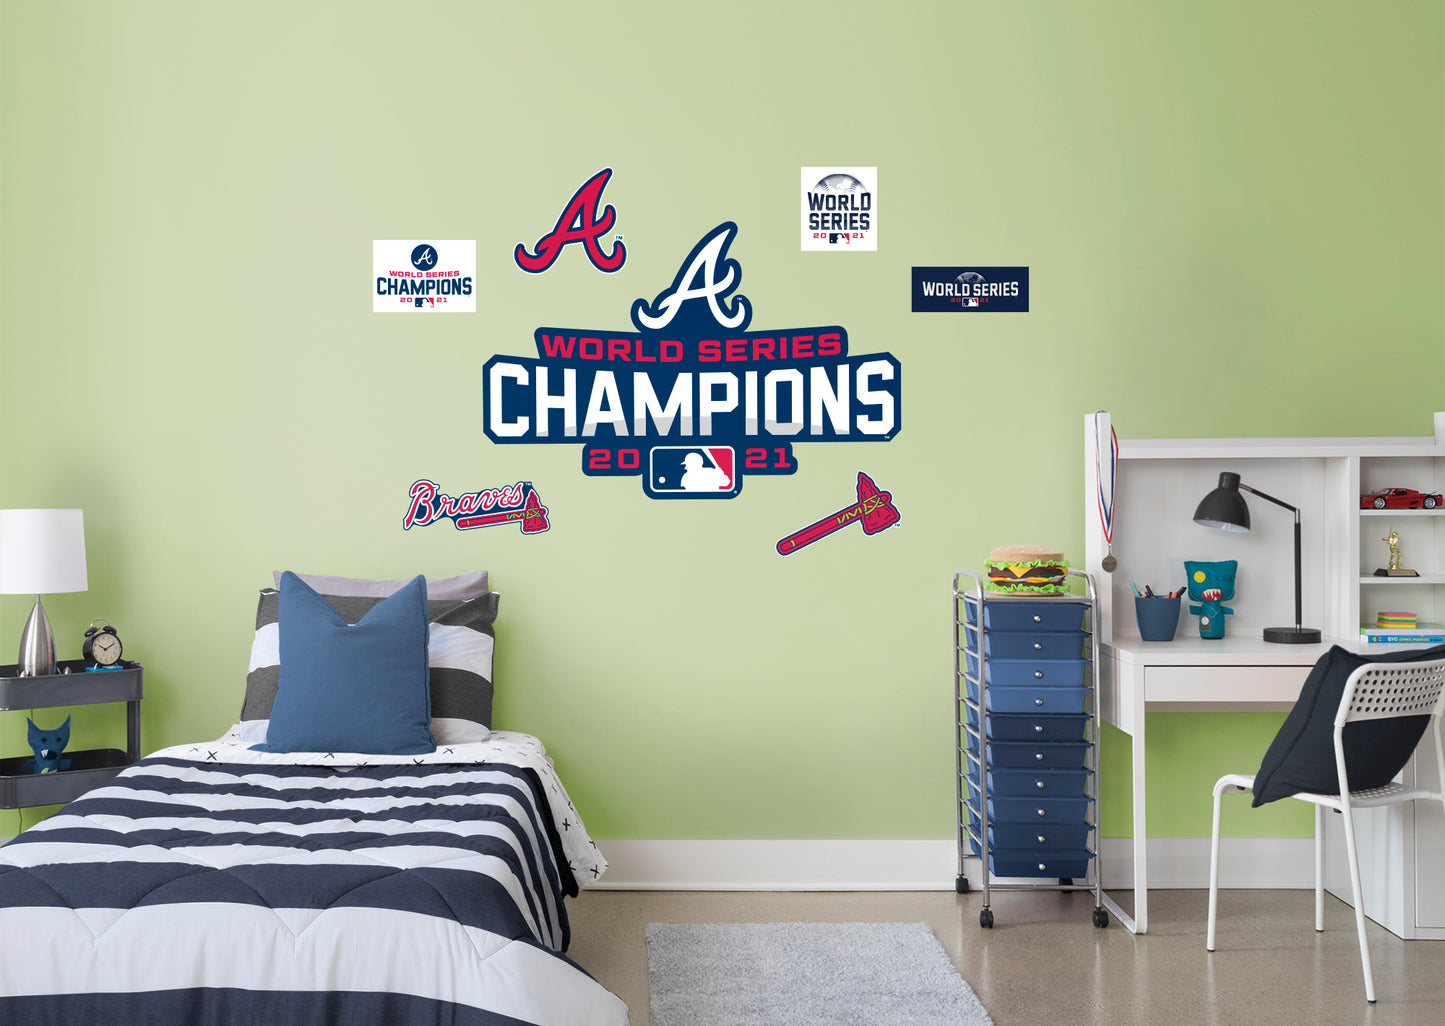 Atlanta Braves: 2021 World Series Champions Logo - Officially Licensed MLB Removable Adhesive Decal